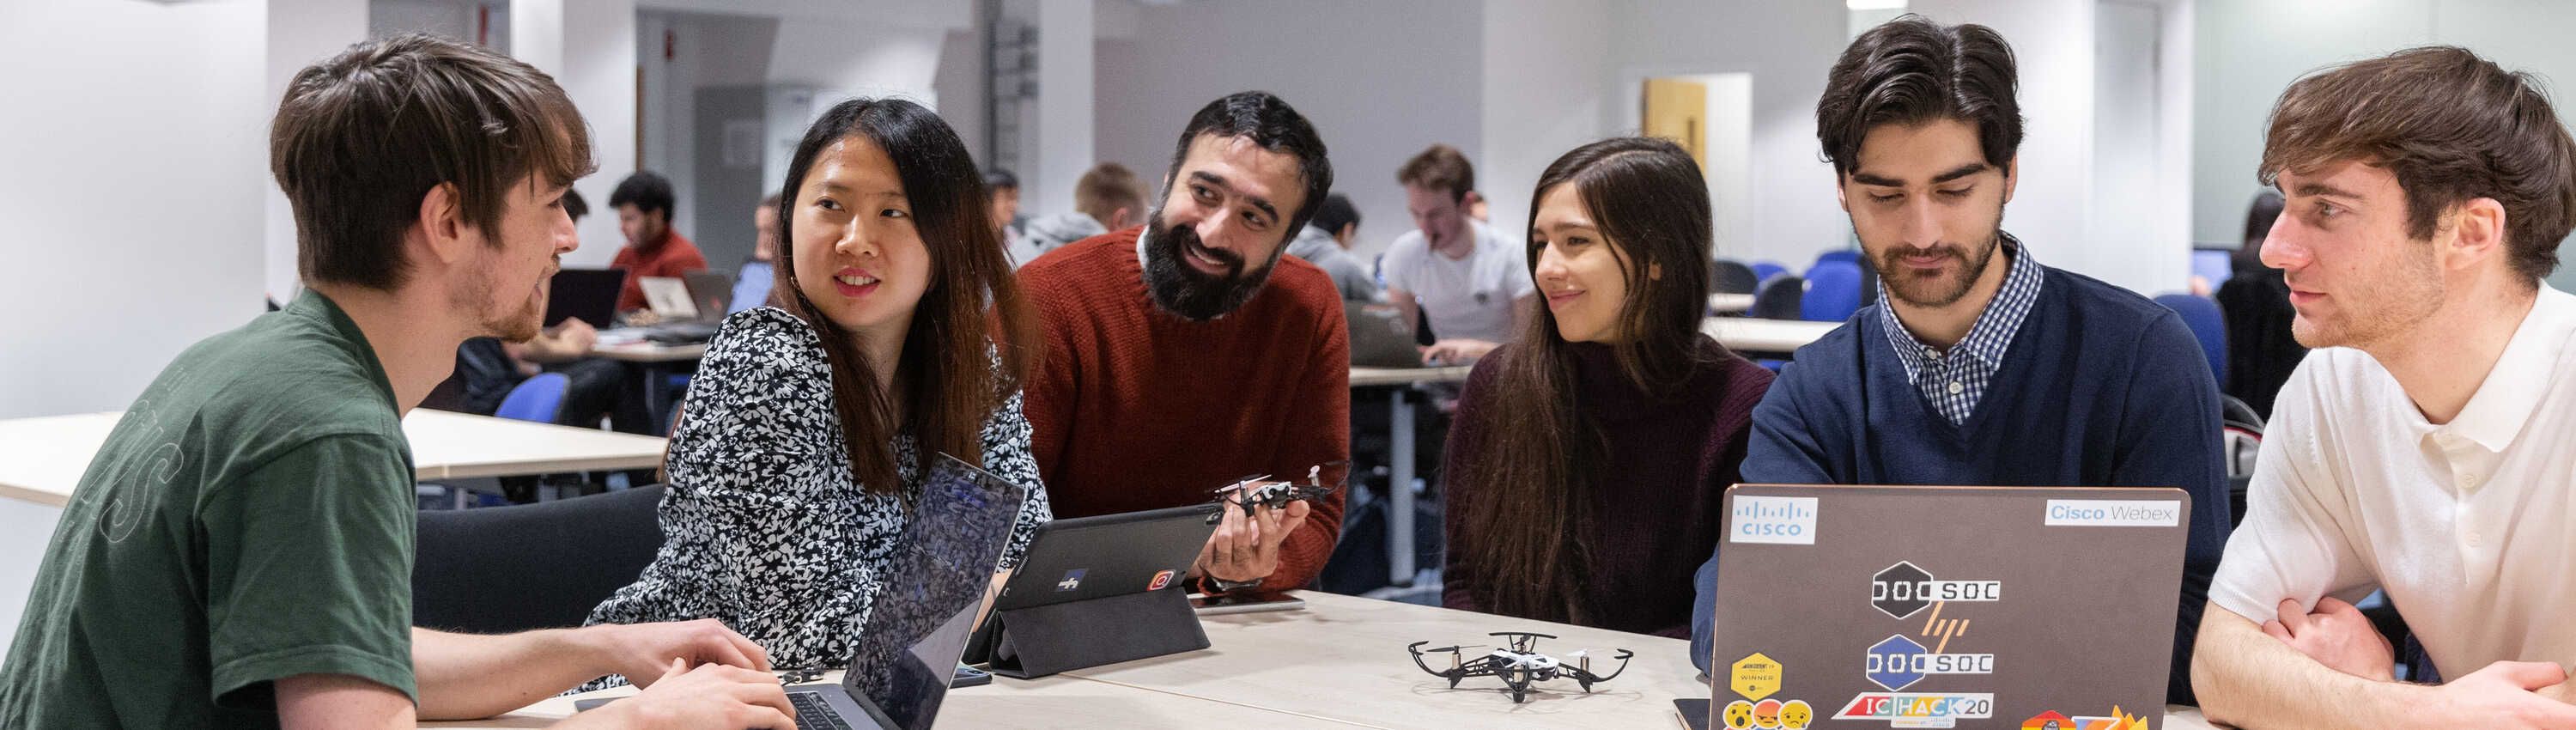 A group of students discussing a research question. A palm-sized quad drone sits on the table in front of them with their laptops and papers.